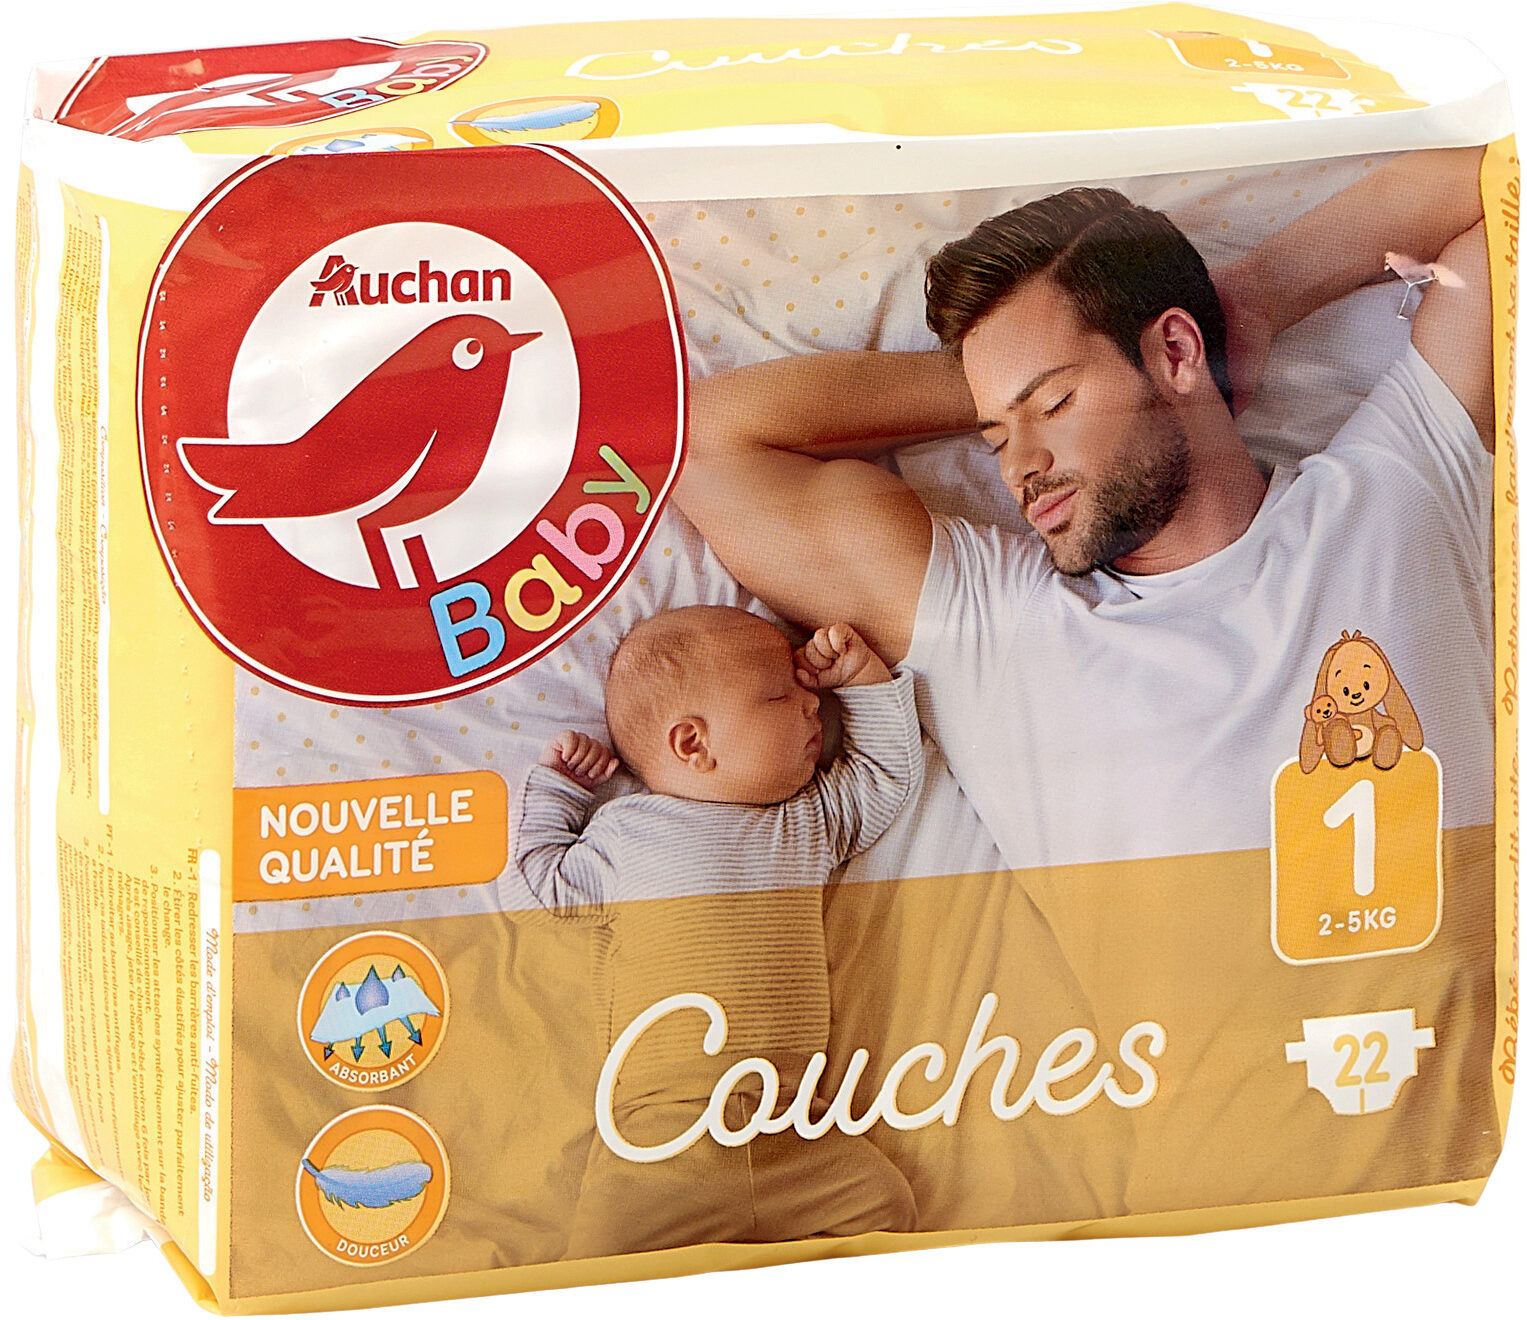 AUCHAN BABY : Couches taille 1 x 22 - Product - fr